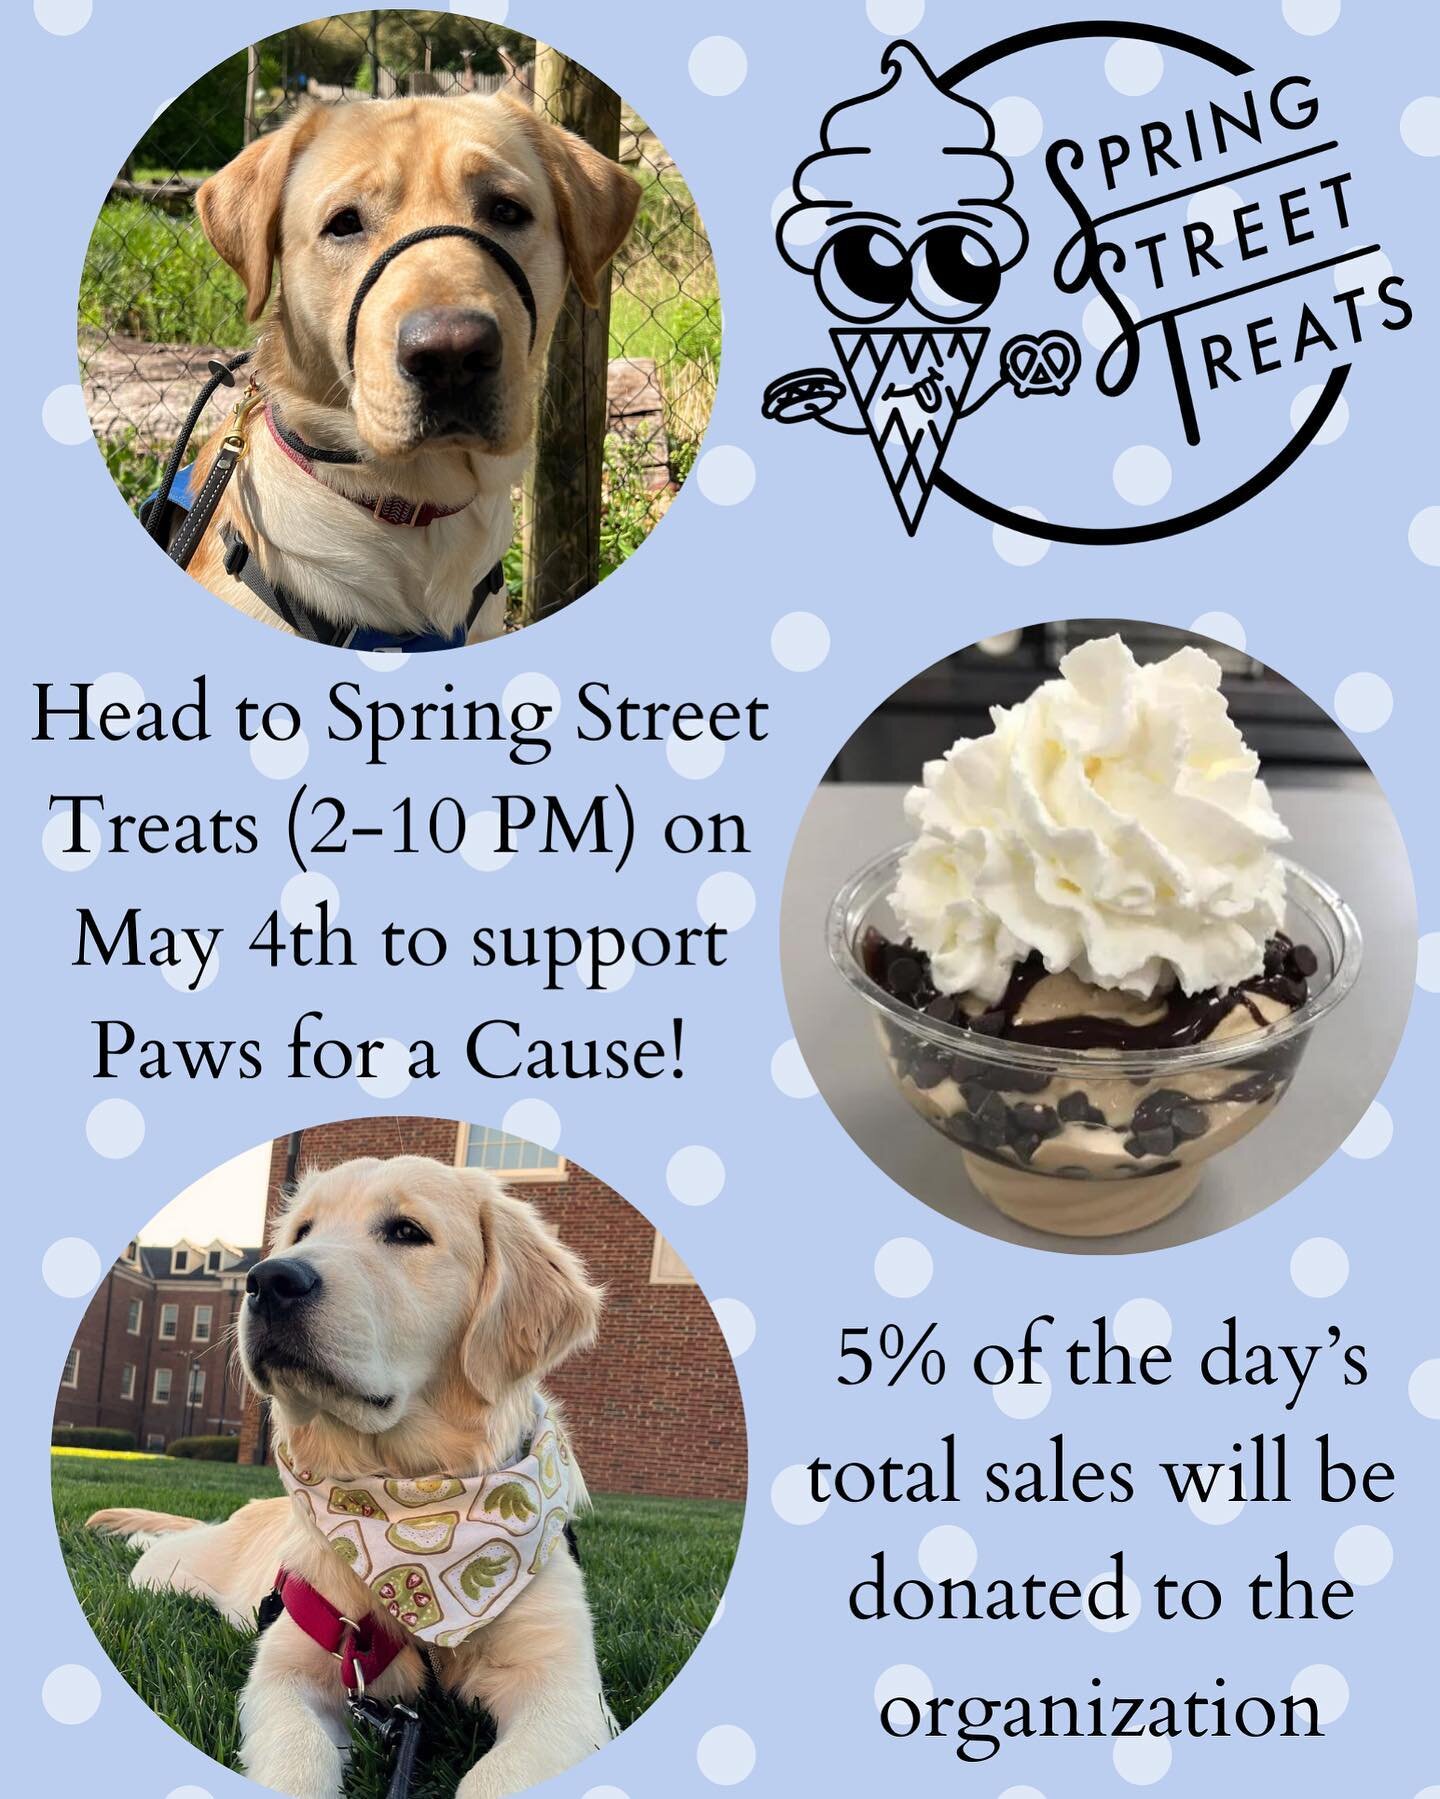 Remember to head to Spring Street Treats today to support Paws for a Cause!🍦

Photo description:
A poster with a light blue background and white polka dots reads &ldquo;head to Spring Street Treats (2-10 pm) on May 4th to support Paws for a Cause! 5